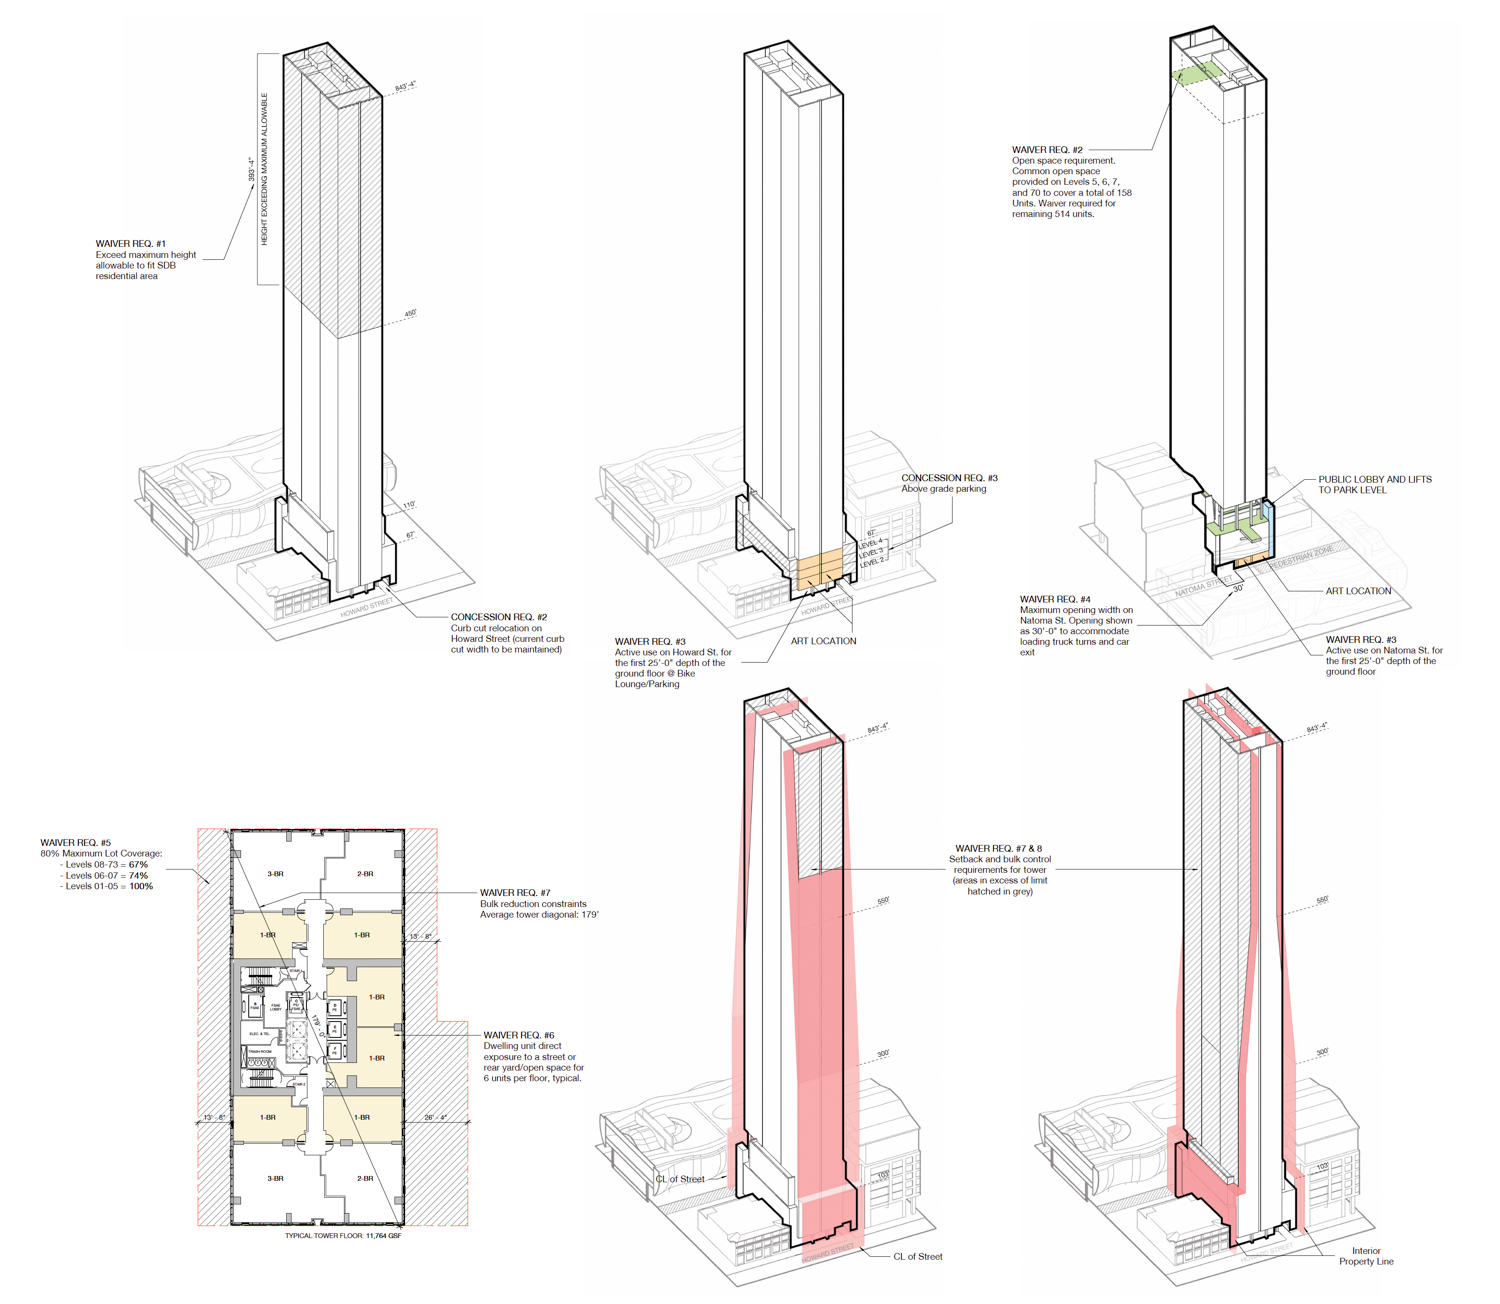 530 Howard Street illustration showing how zoning waivers will help shape the tower, illustration by Pickard Chilton